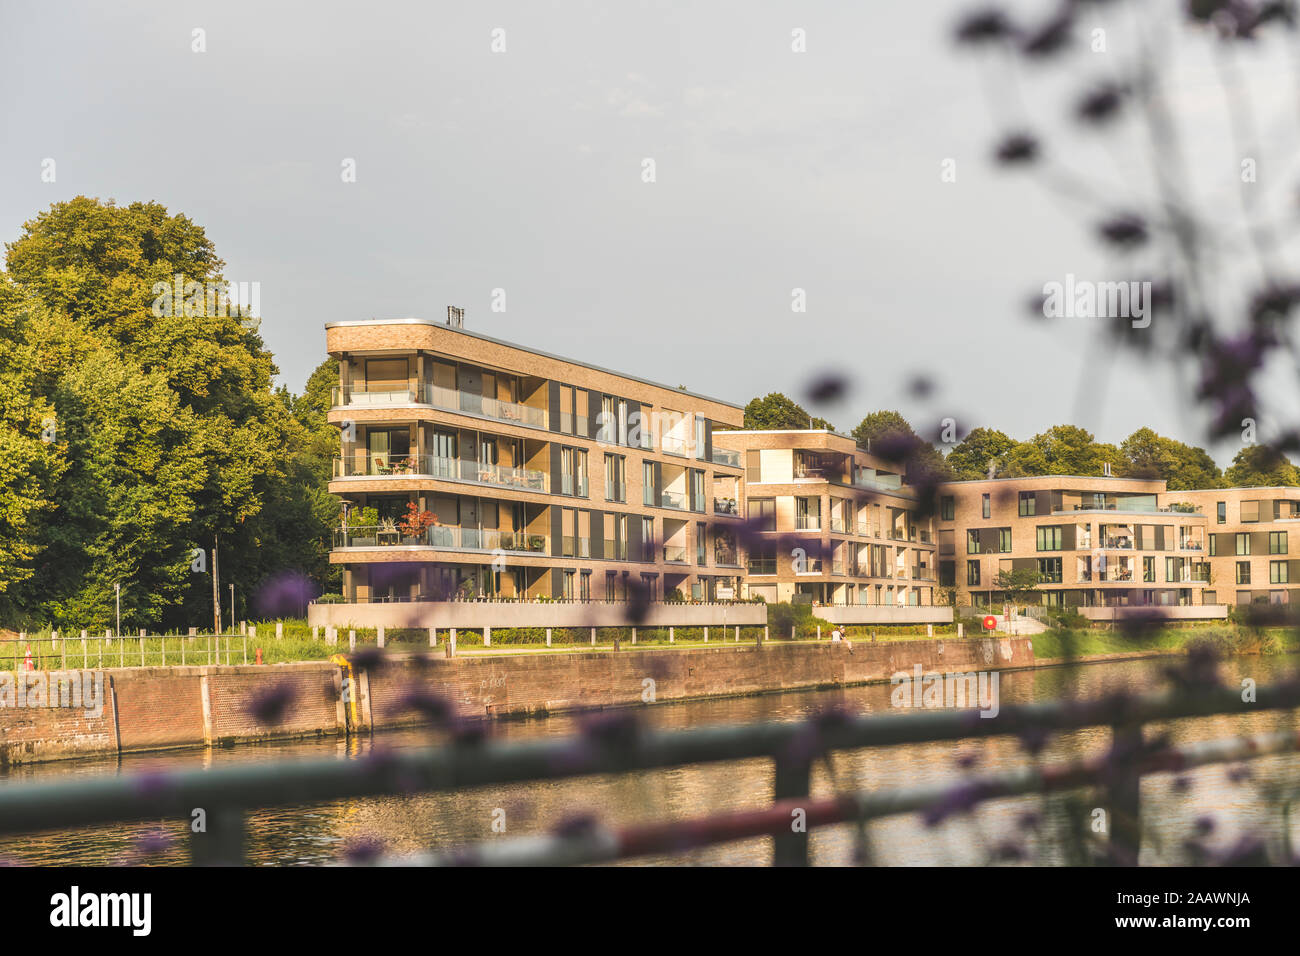 Modern buildings by Trave river against sky in Lübeck, Germany Stock Photo